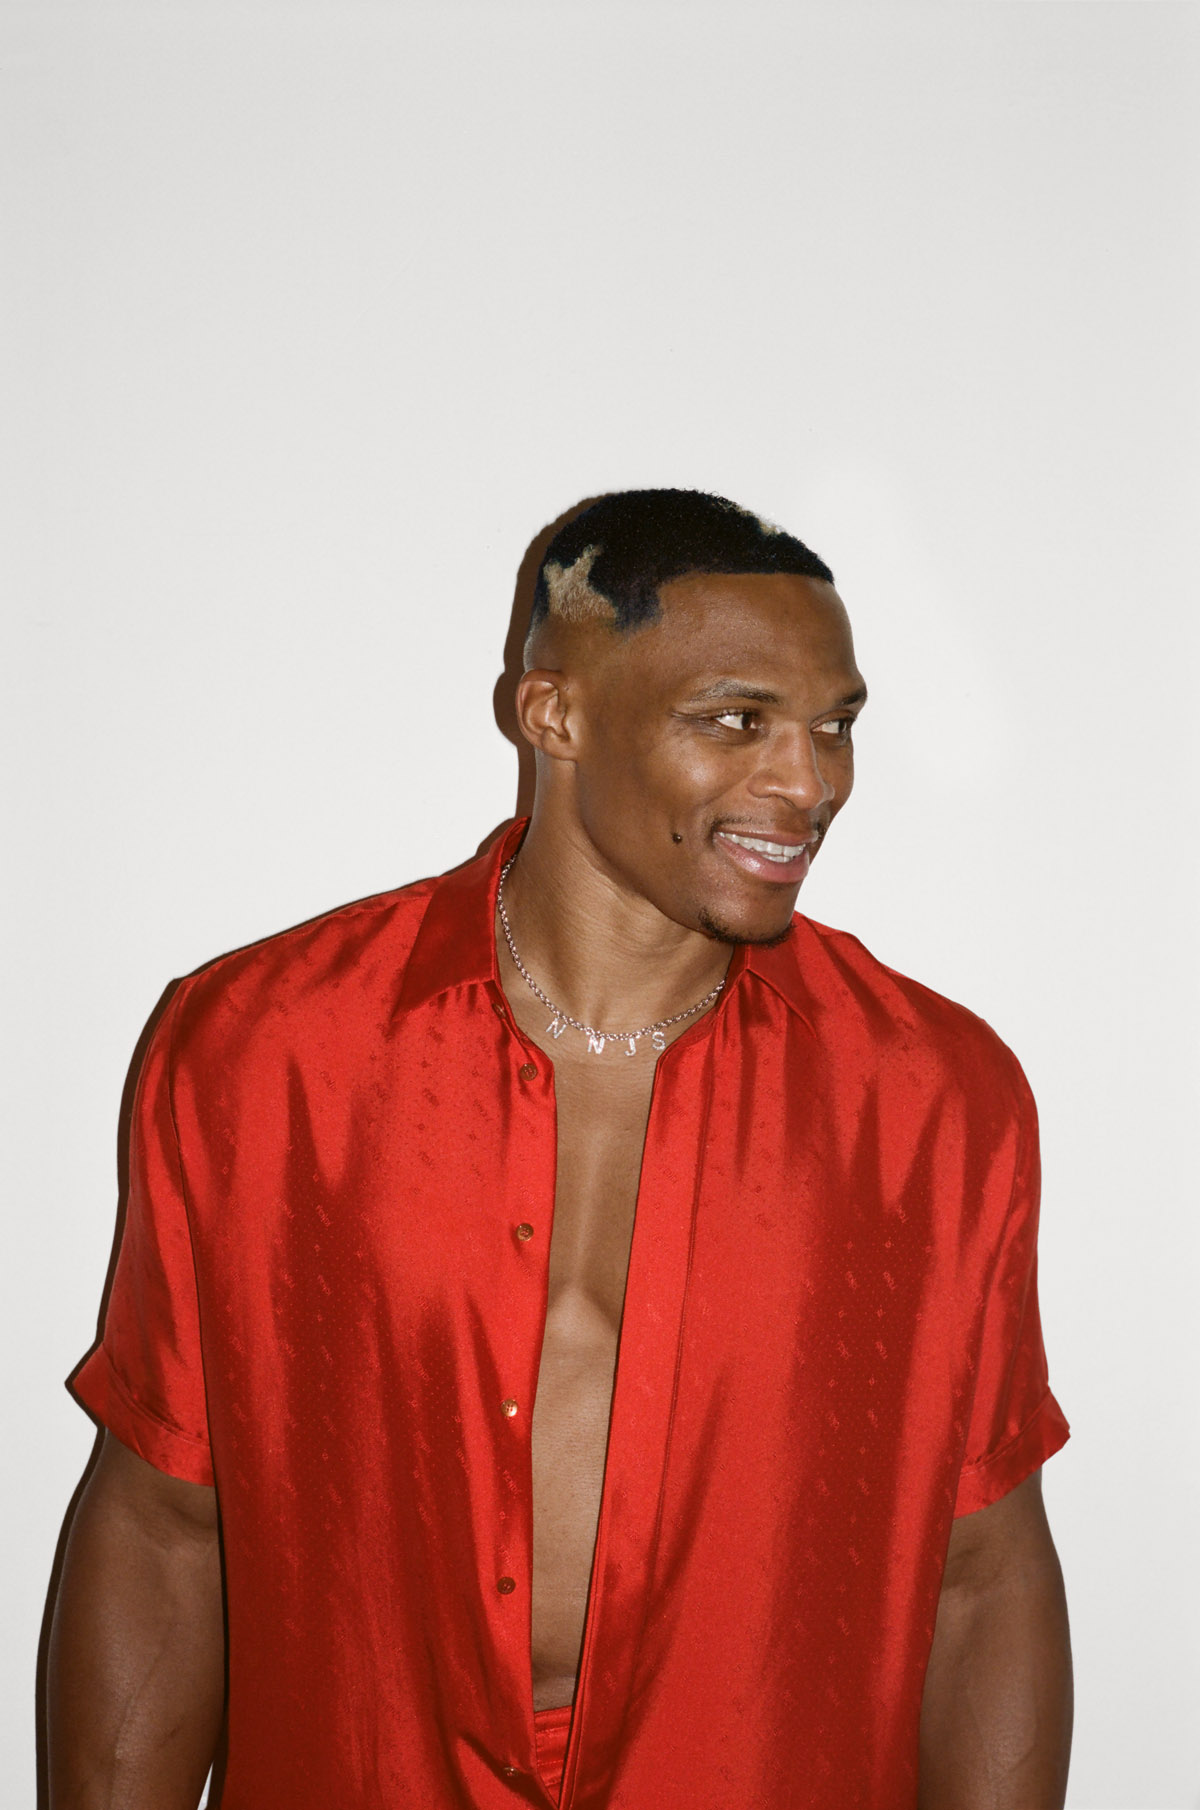 Russell Westbrook's new line of underwear is just as ridiculous as